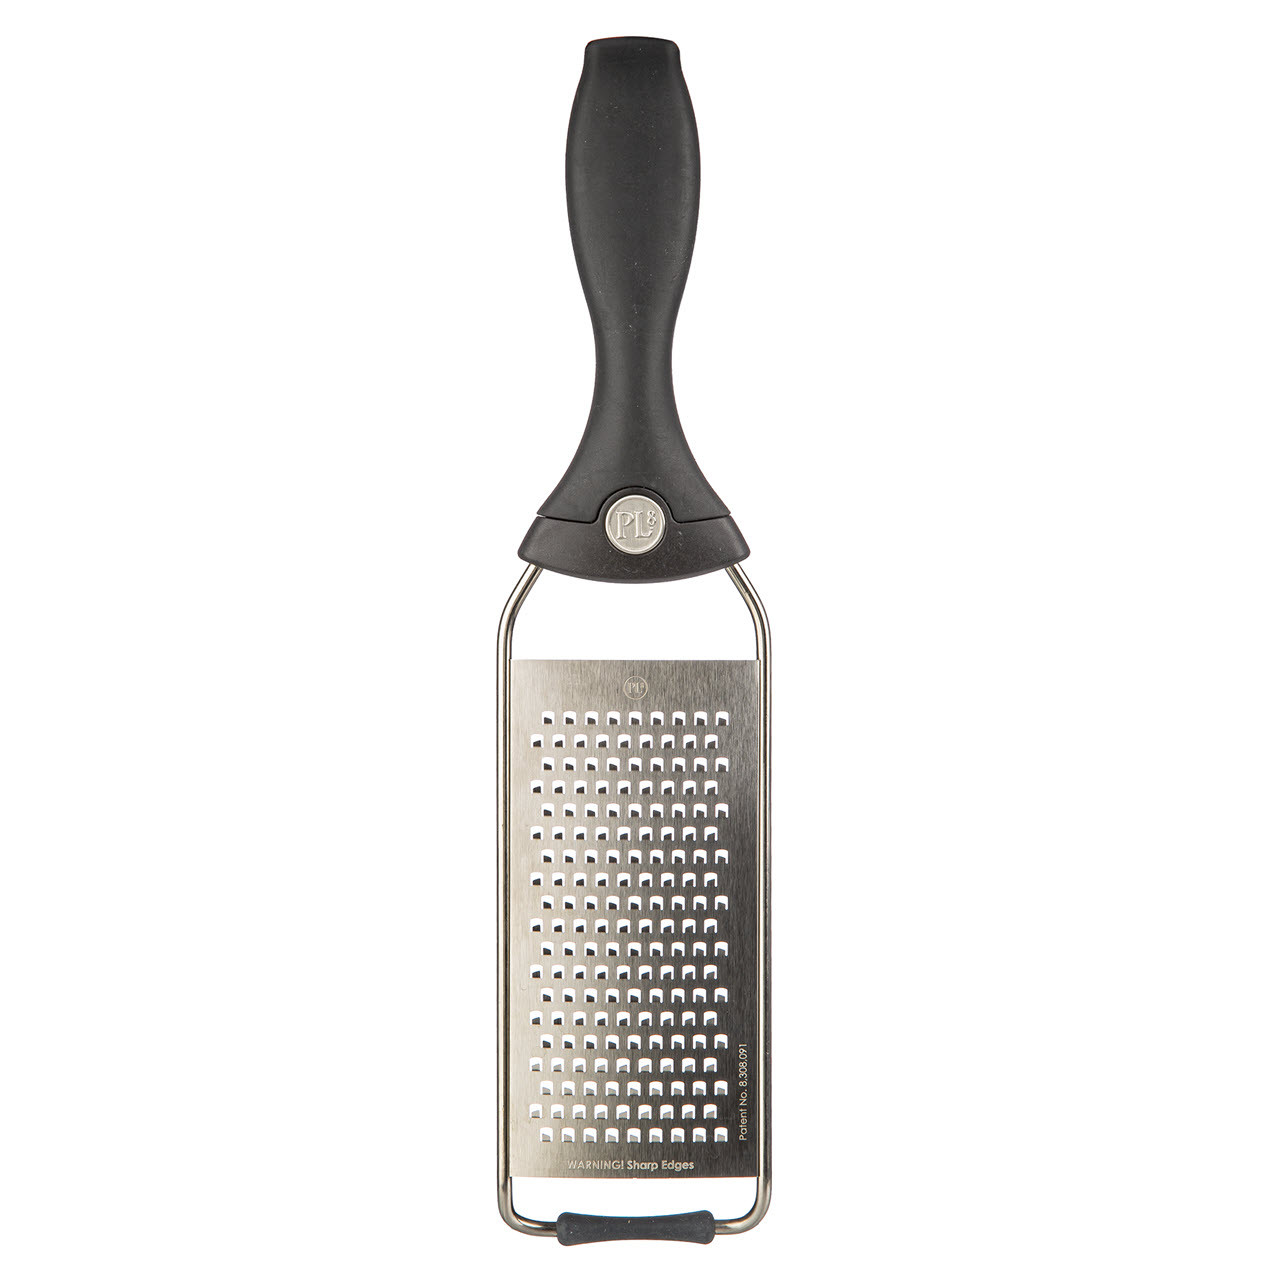 PL8 Stainless Steel Fine Grater